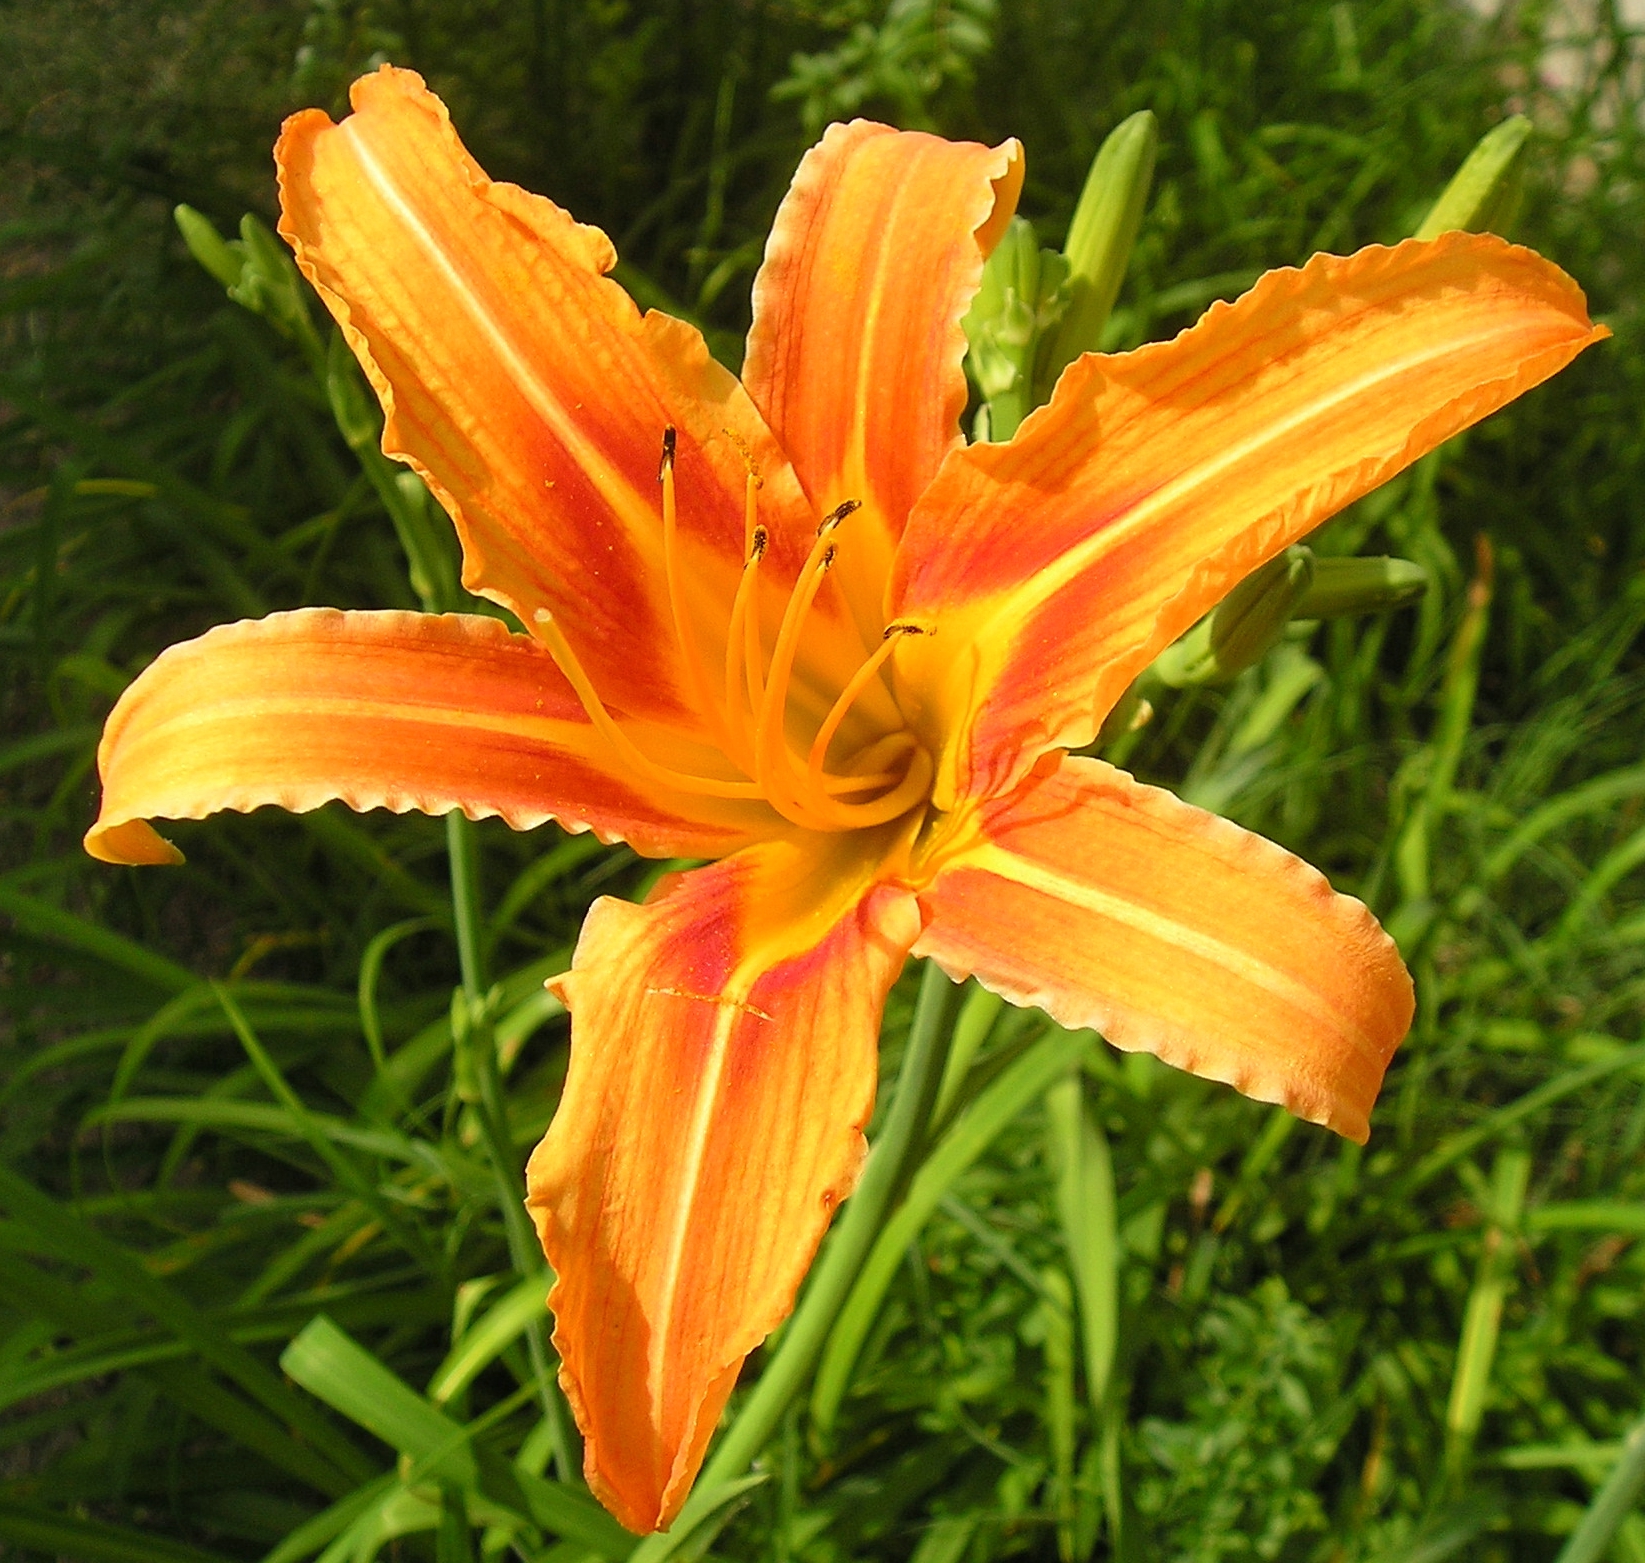 Daylily (Hemerocallis) - Nutrition Facts, Benefits, Uses, Pictures